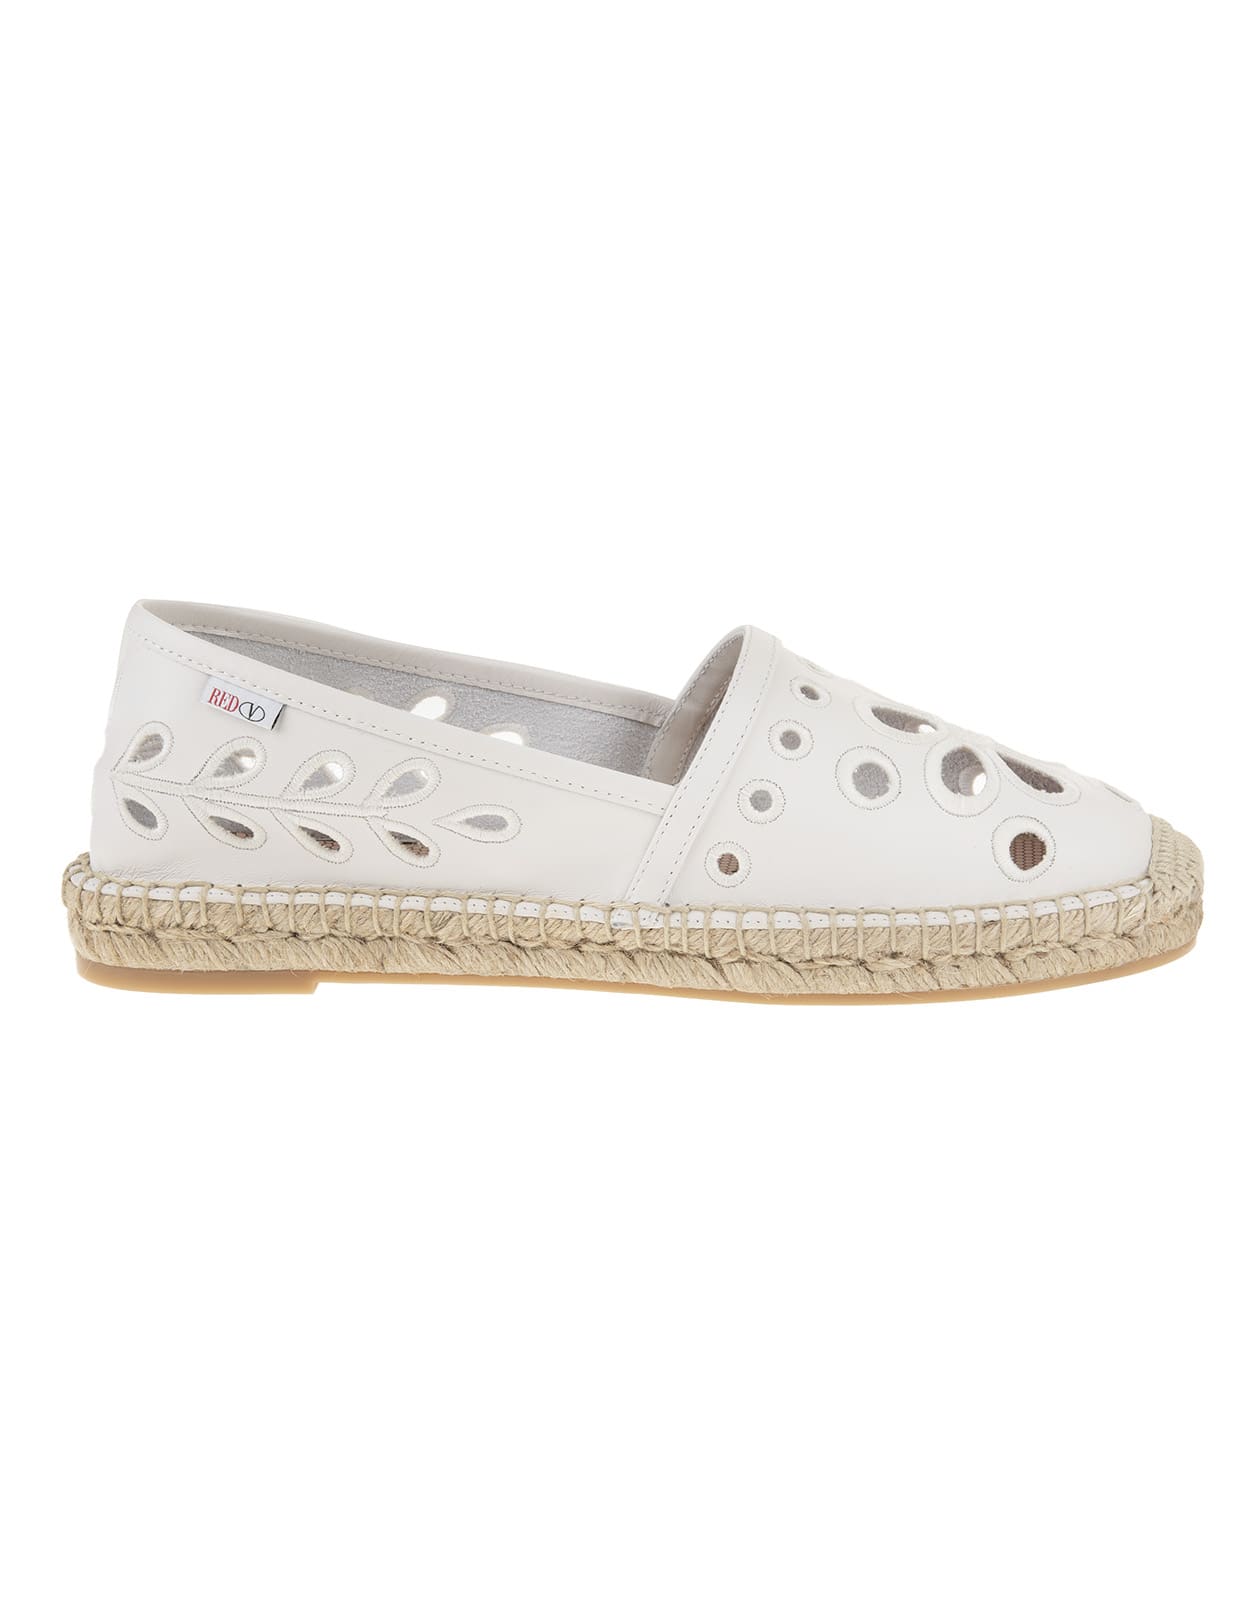 RED Valentino White Leather Espadrilles With Cut-out Detail